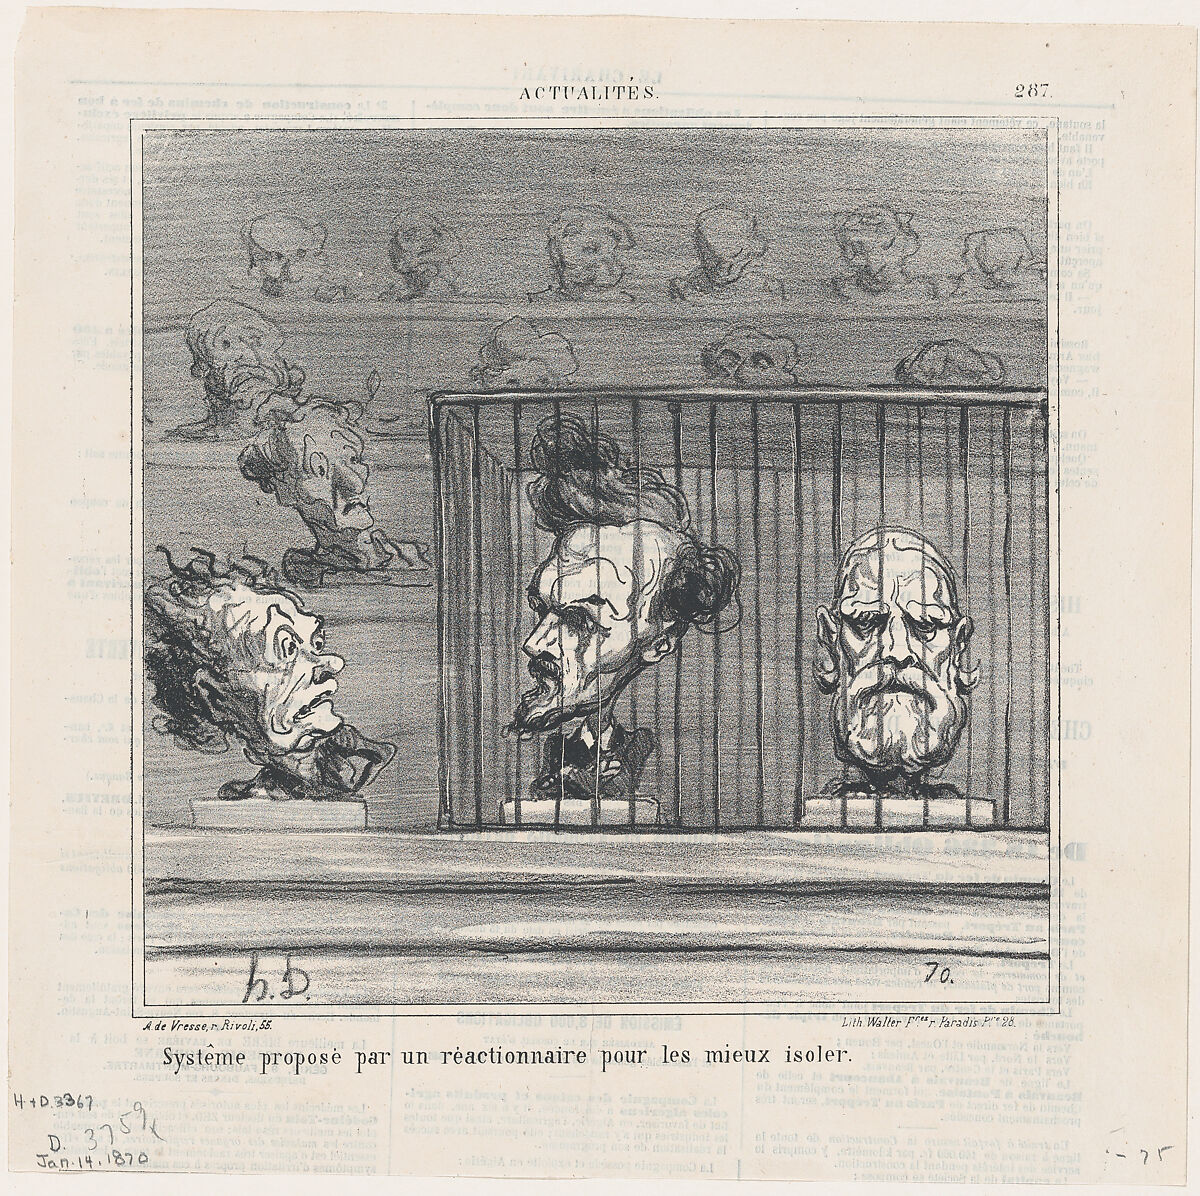 Proposal for a new system to better isolate reactionnaries, from 'News of the day,' published in Le Charivari, January 14, 1870, Honoré Daumier (French, Marseilles 1808–1879 Valmondois), Lithograph on newsprint; second state of two (Delteil) 